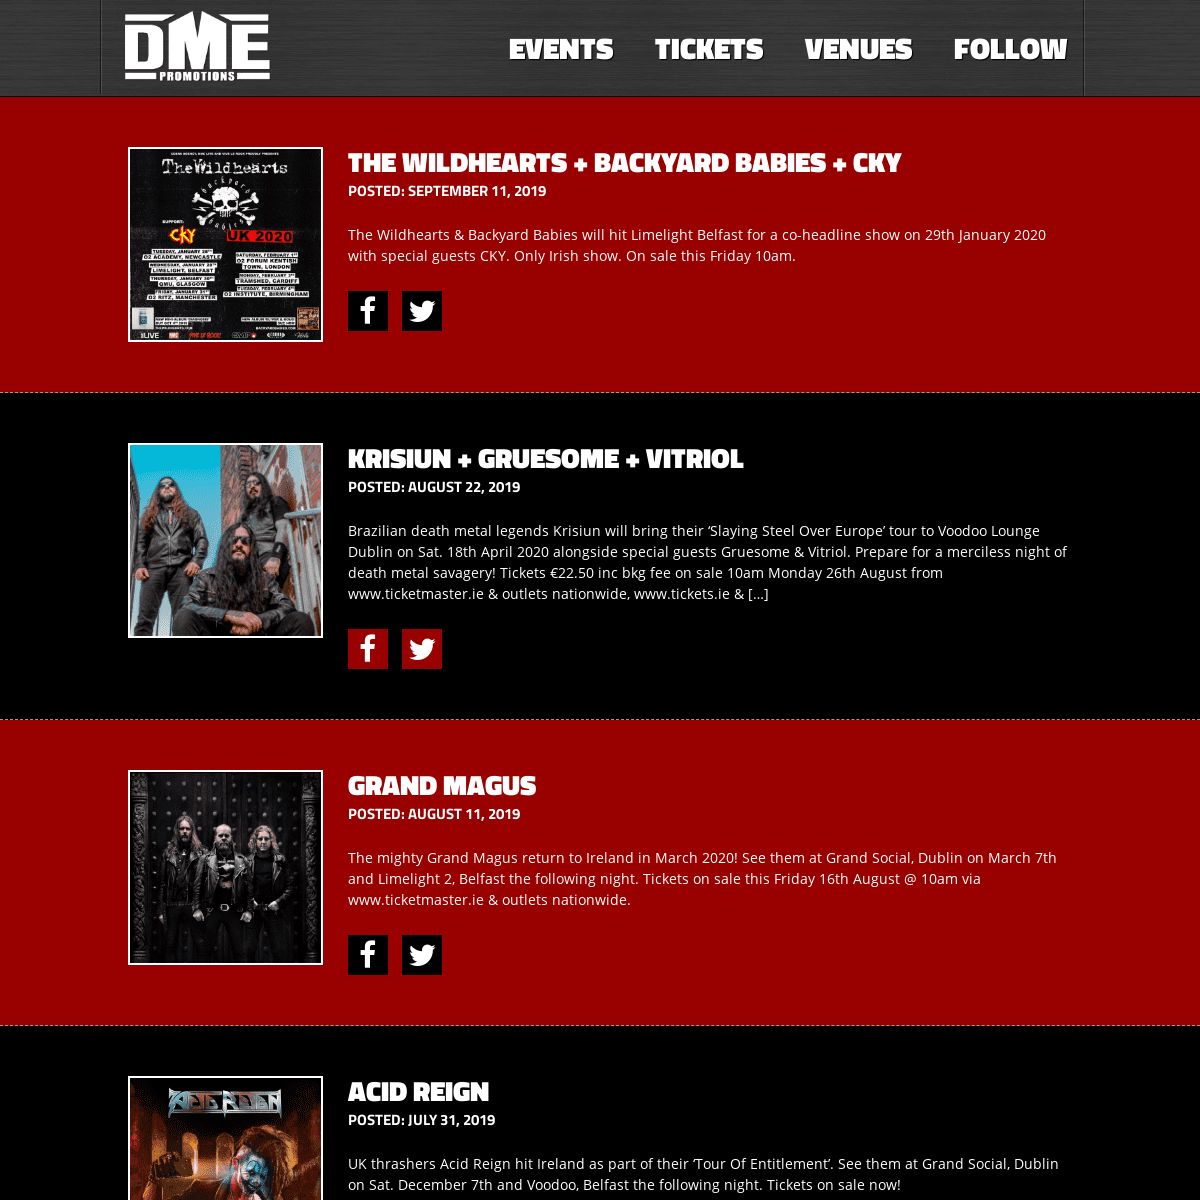 A complete backup of dme-promotions.com